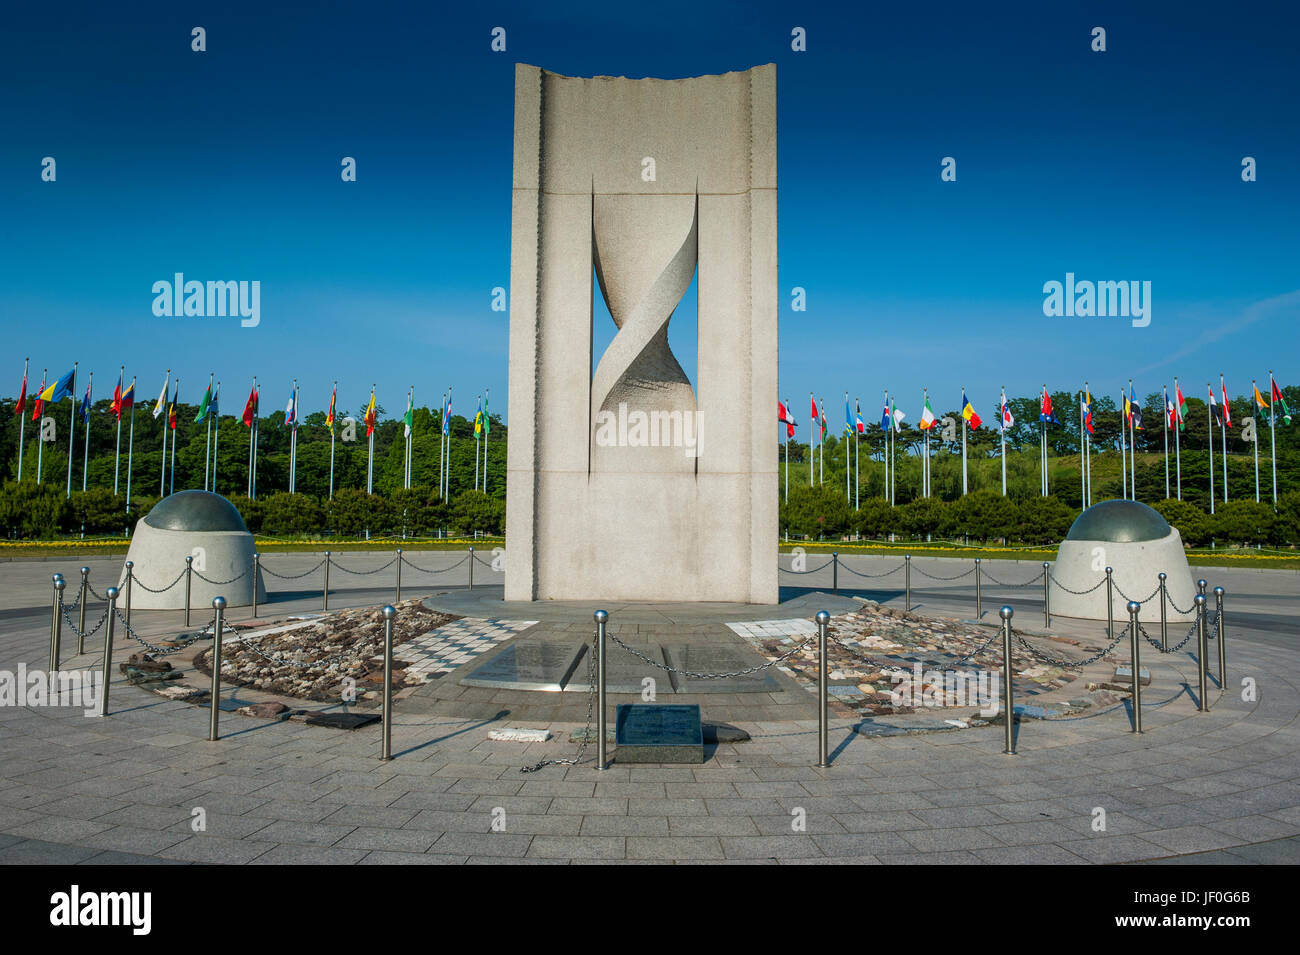 Monument with flags at the Olympic park, Seoul, South Korea Stock Photo